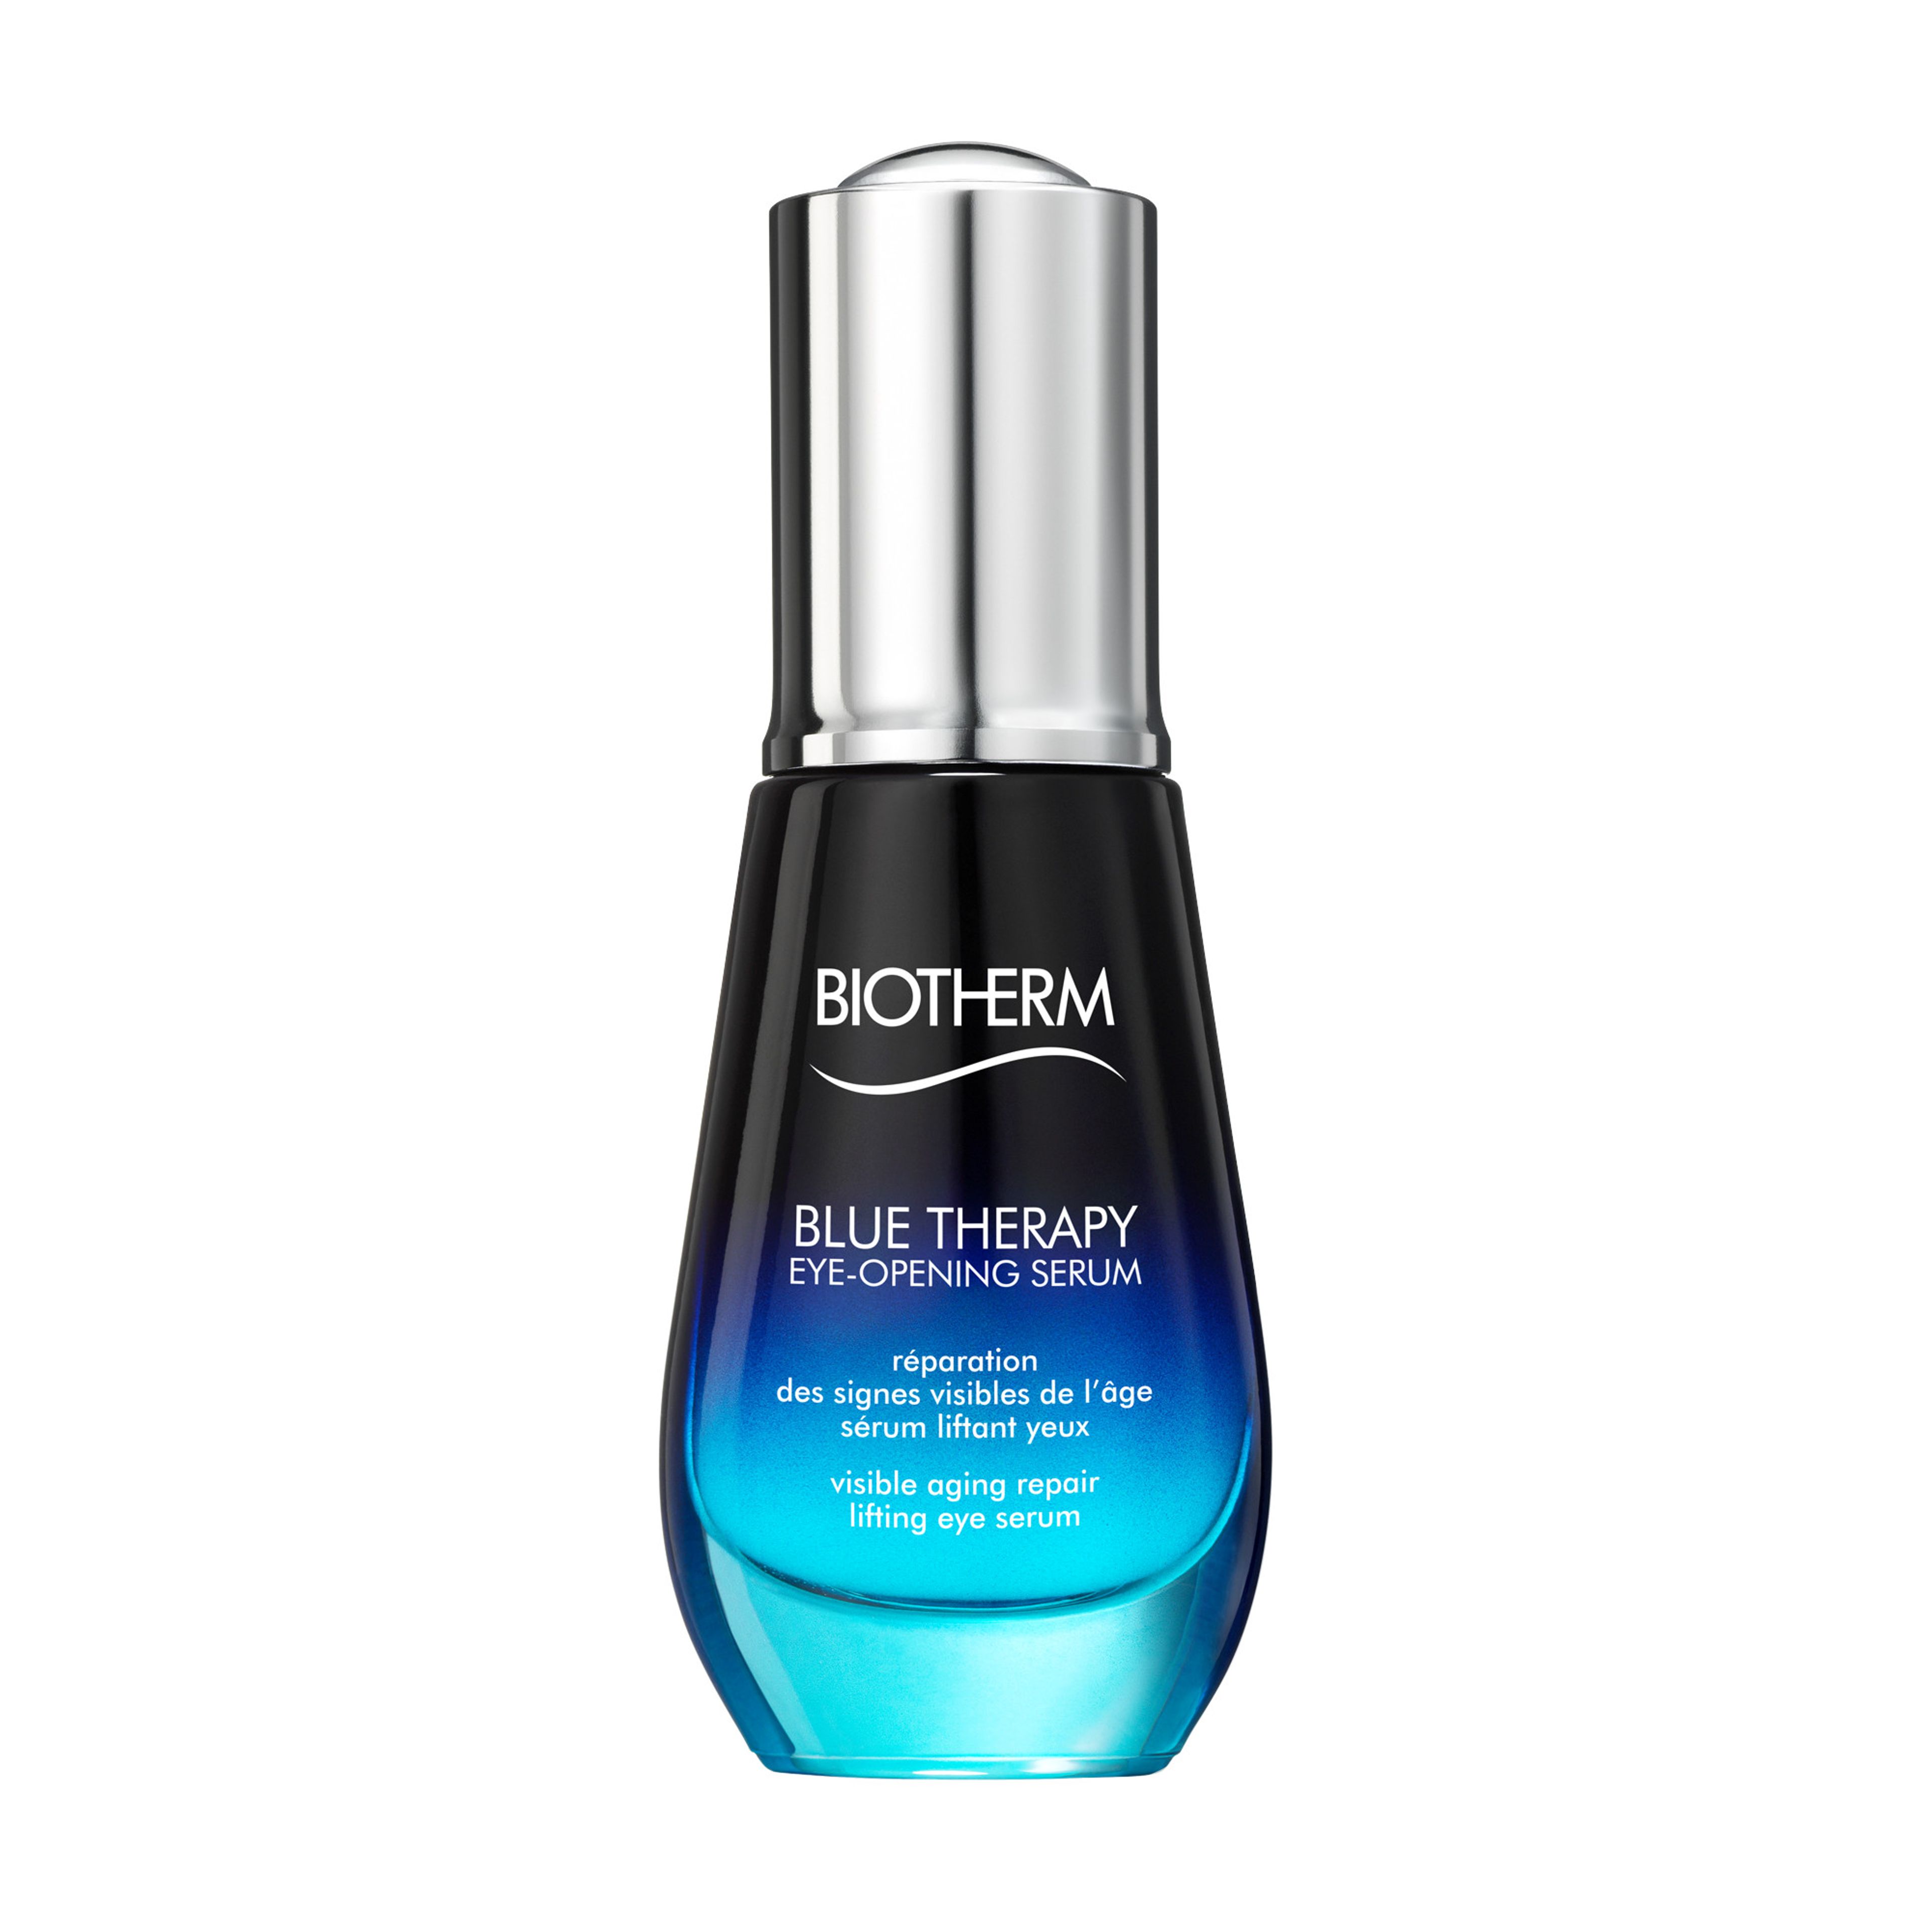 Biotherm Blue Therapy Eye-opening Serum 3